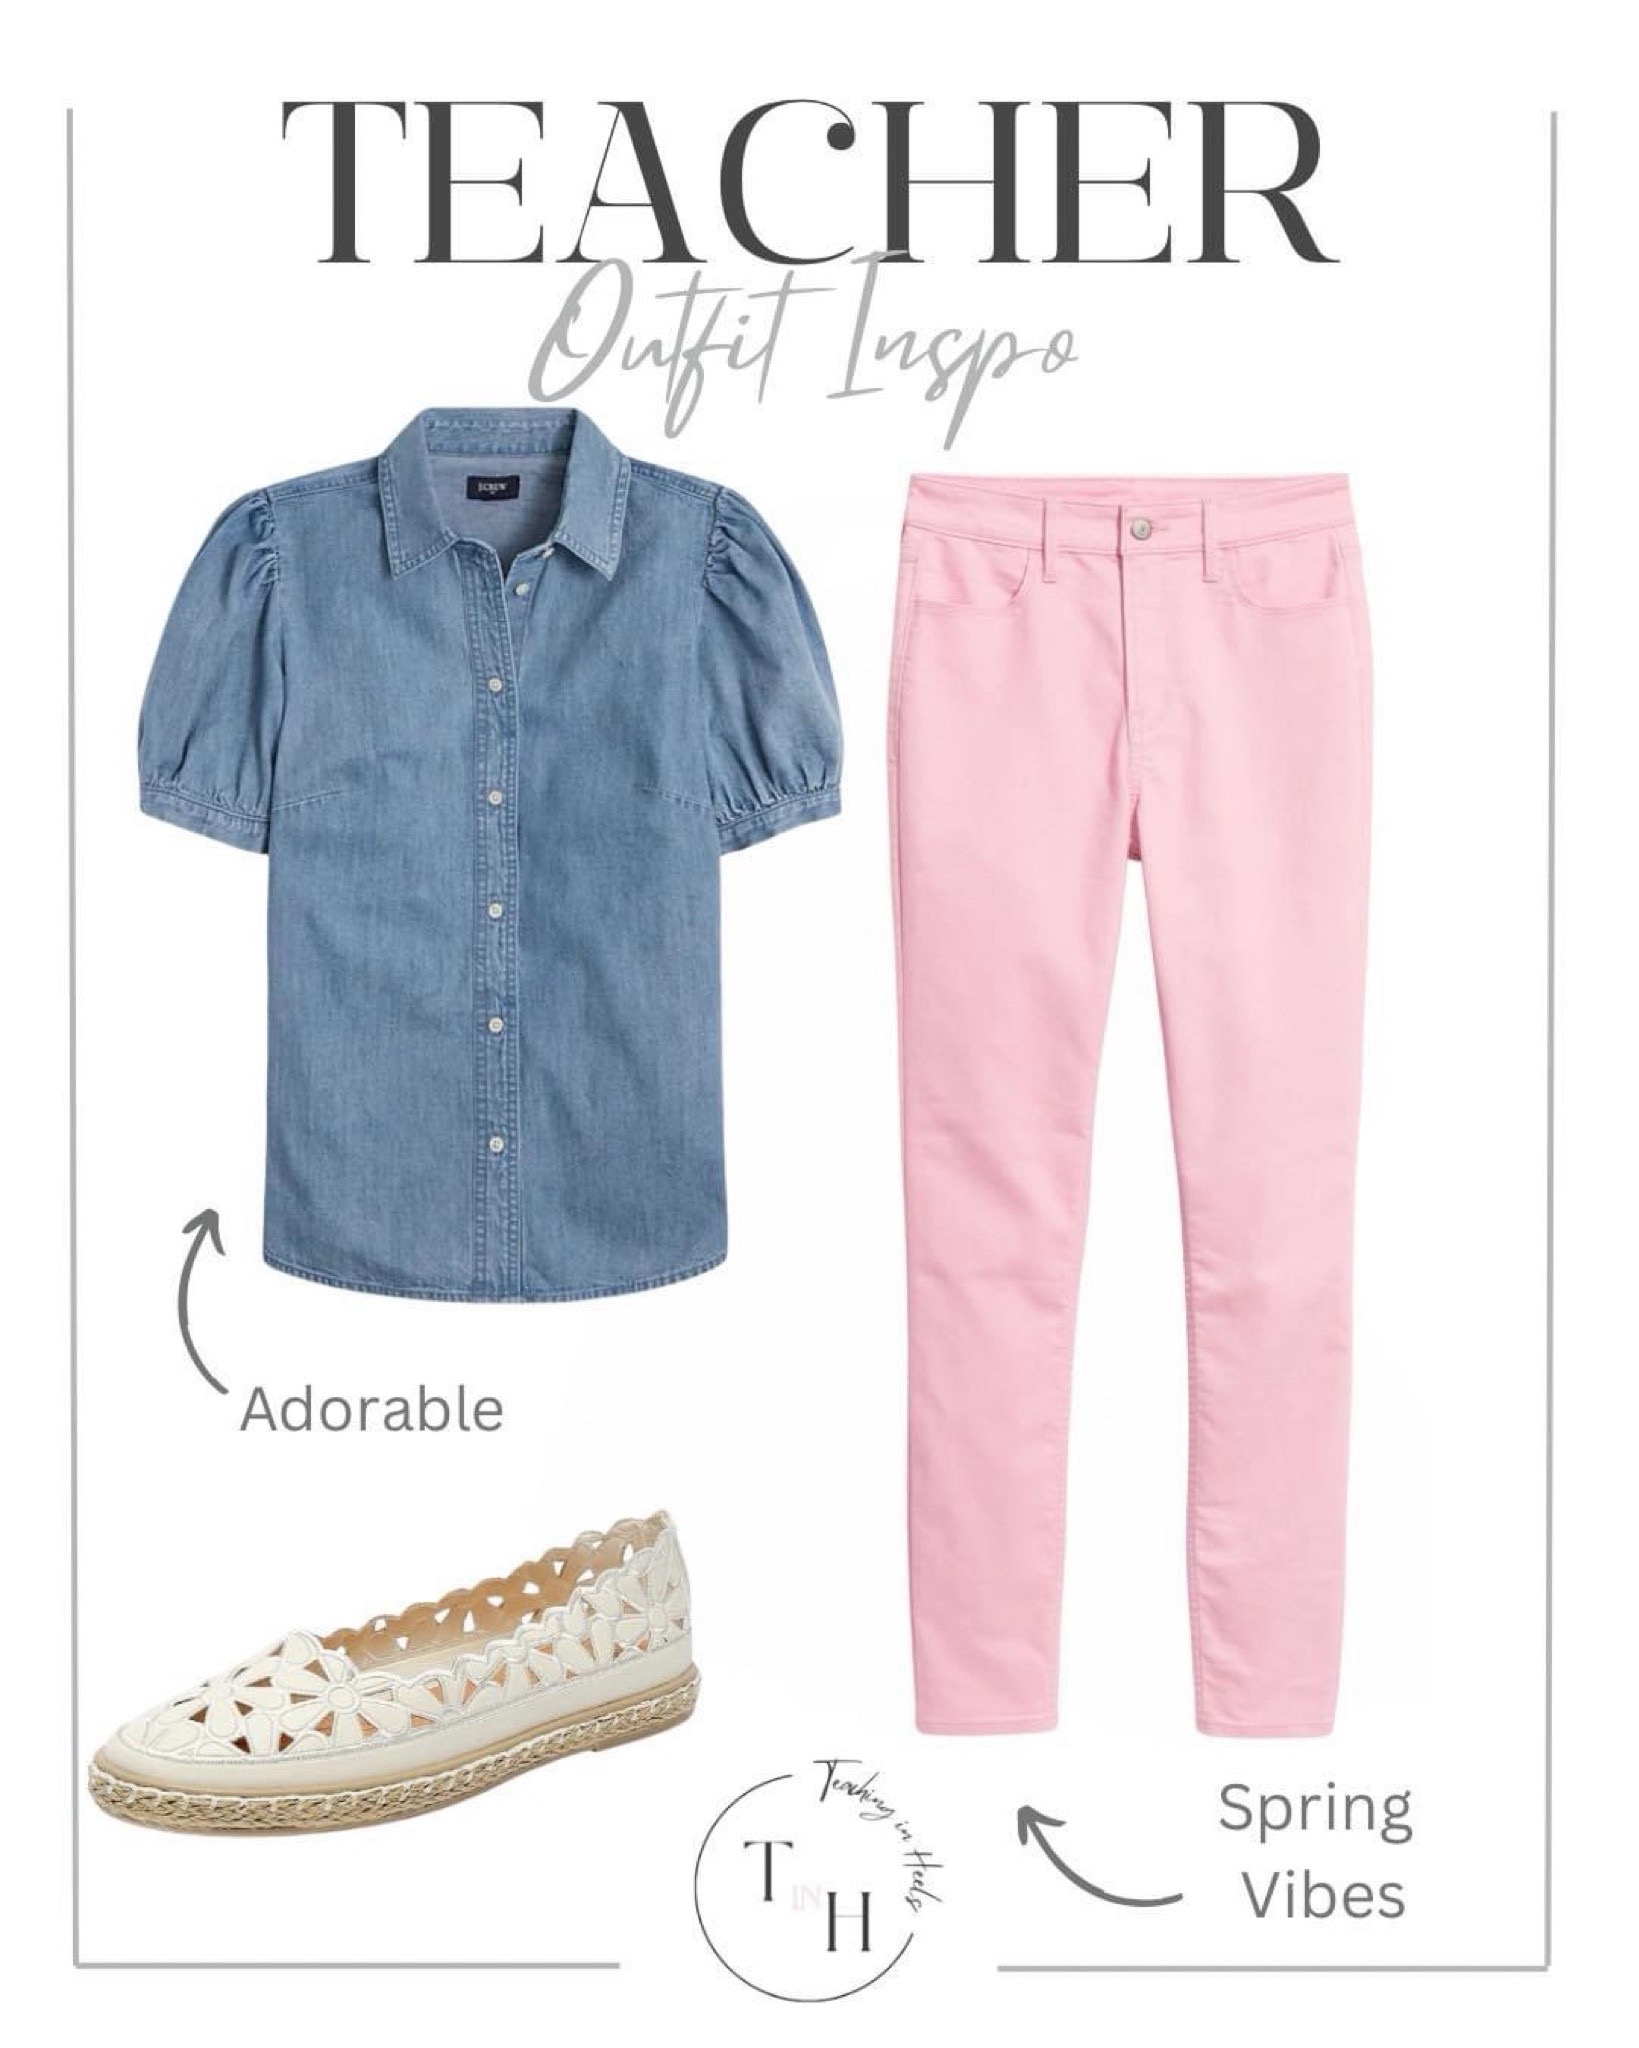 Chic & Comfortable: Spring Fashion for Teachers

spring, spring fashion, spring outfit, teacher outfit, workwear, work outfit 